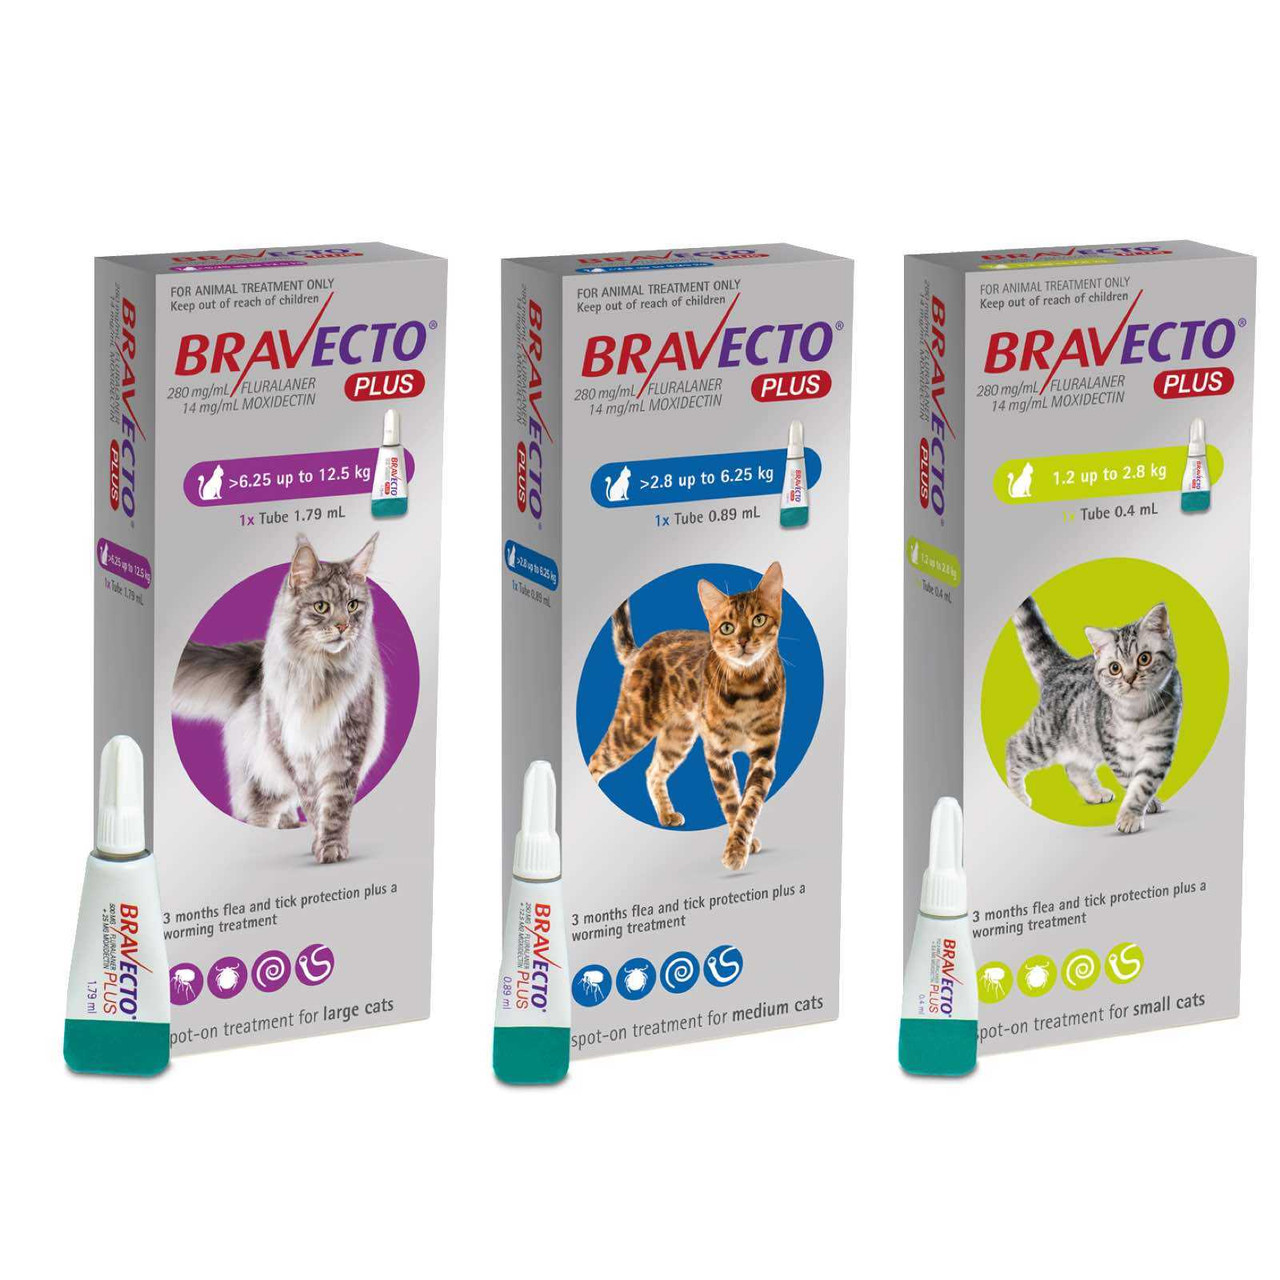 20% Off Bravecto PLUS Topical Solution for Cats at Atlantic Pet Products